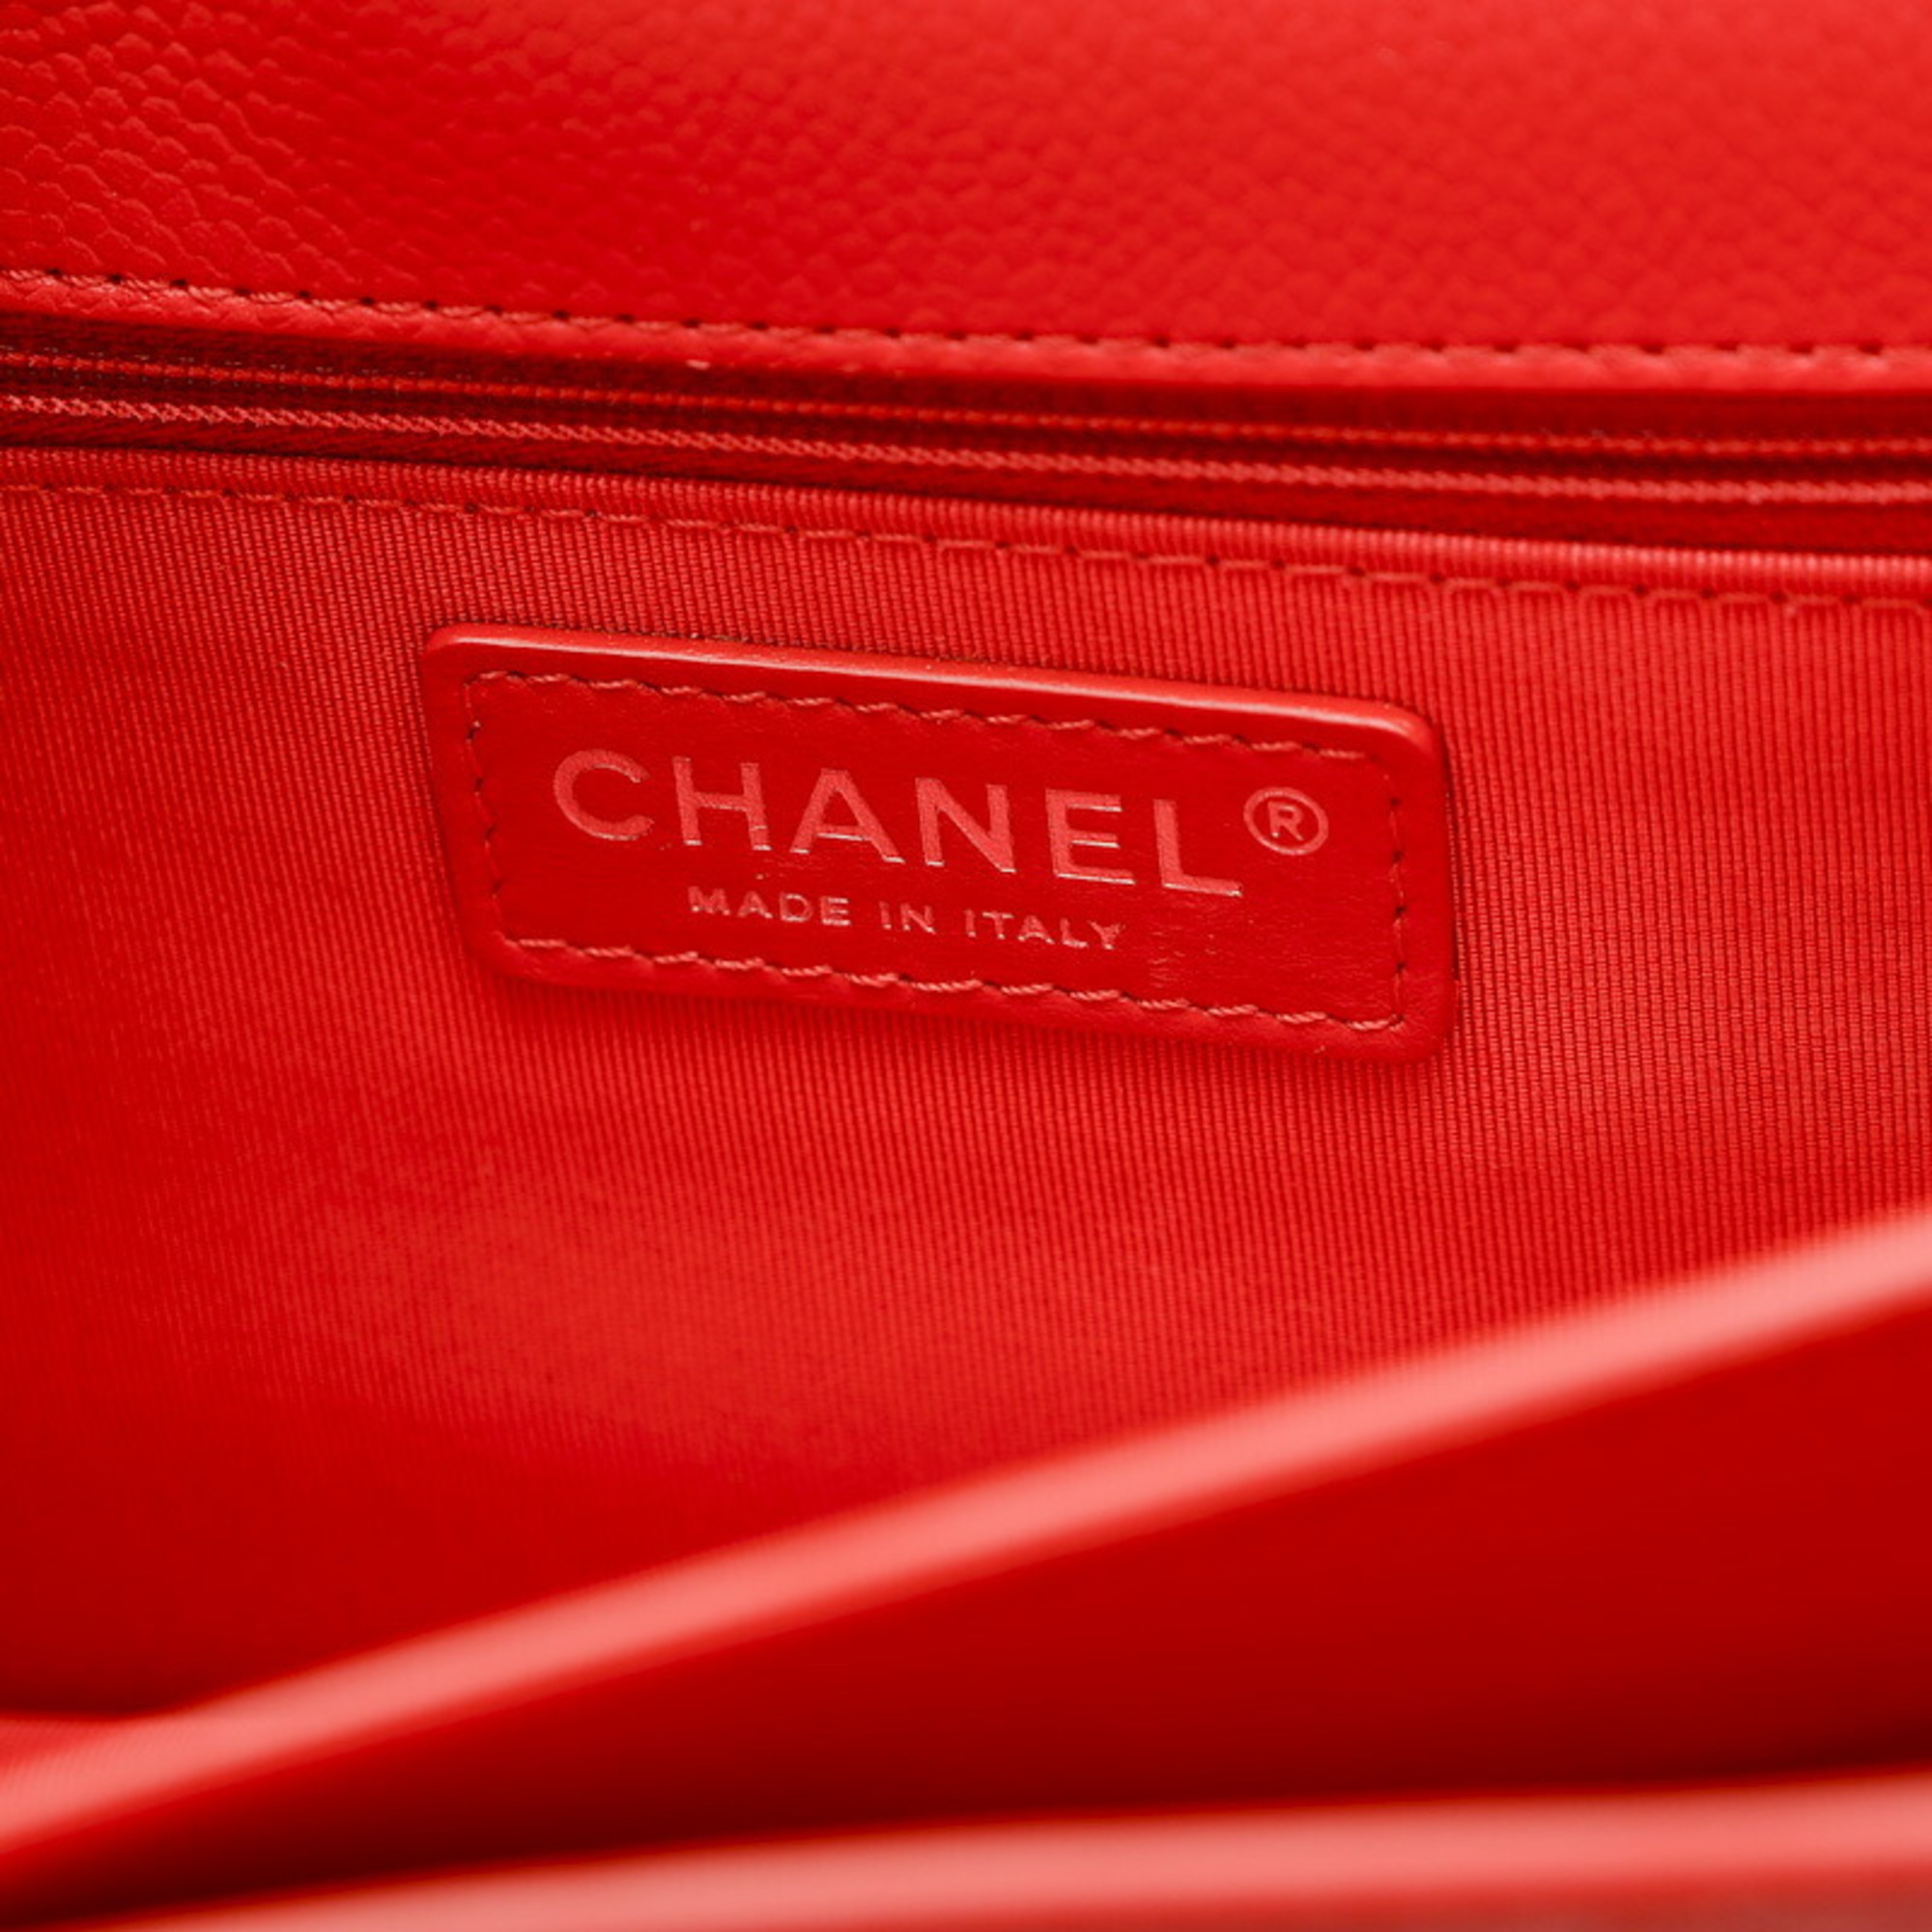 Chanel Double Chain Shoulder Bag Soft Caviar Skin Red